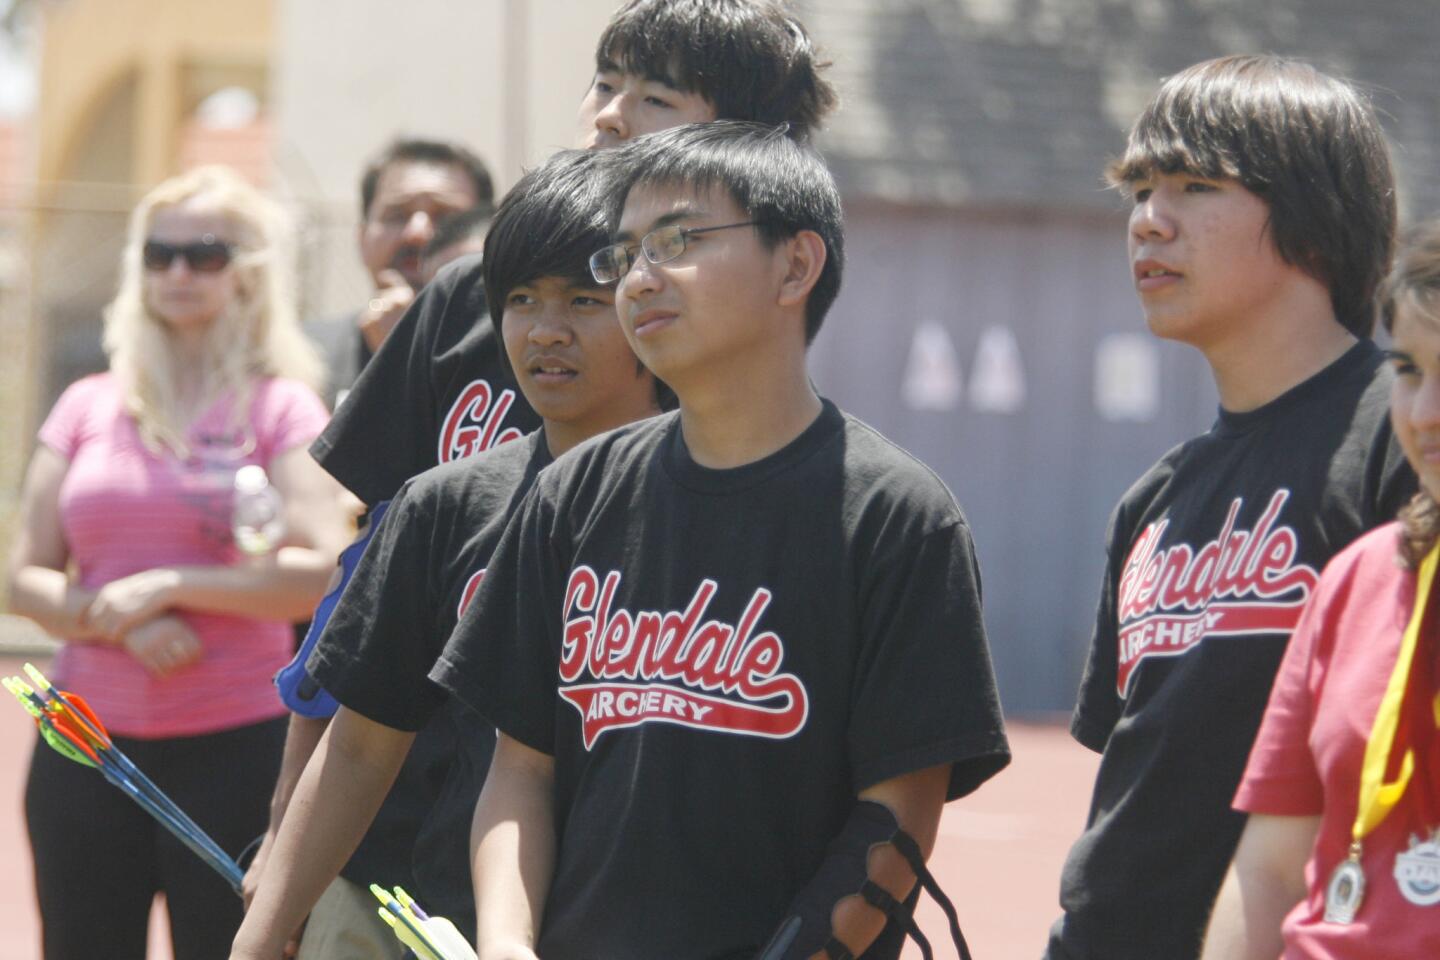 Archery competition at Glendale High School